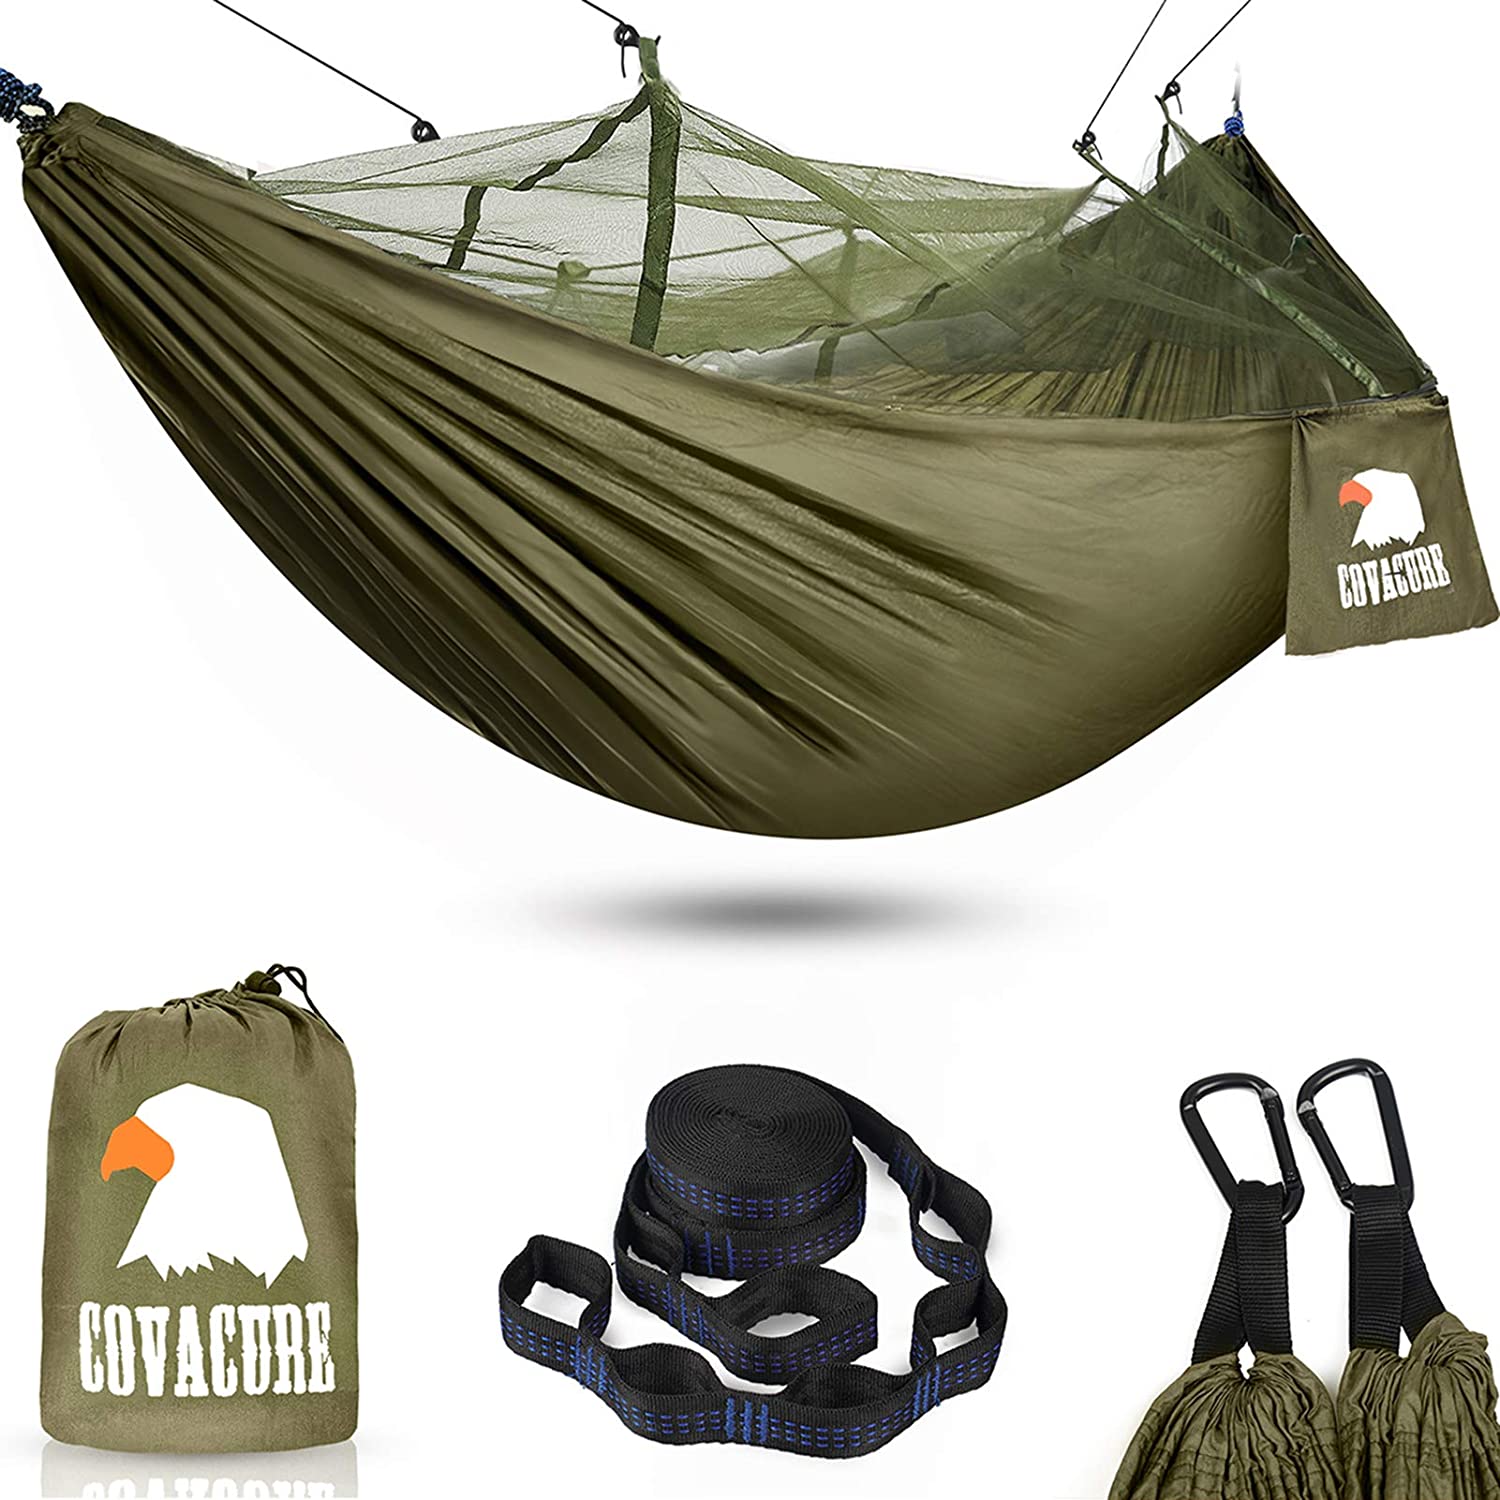 Goodlee Single & Double Portable Camping Hammock,Lightweight Nylon Parachute Hammock with Tree Straps for Travel,Camping,Backpacking and More. 